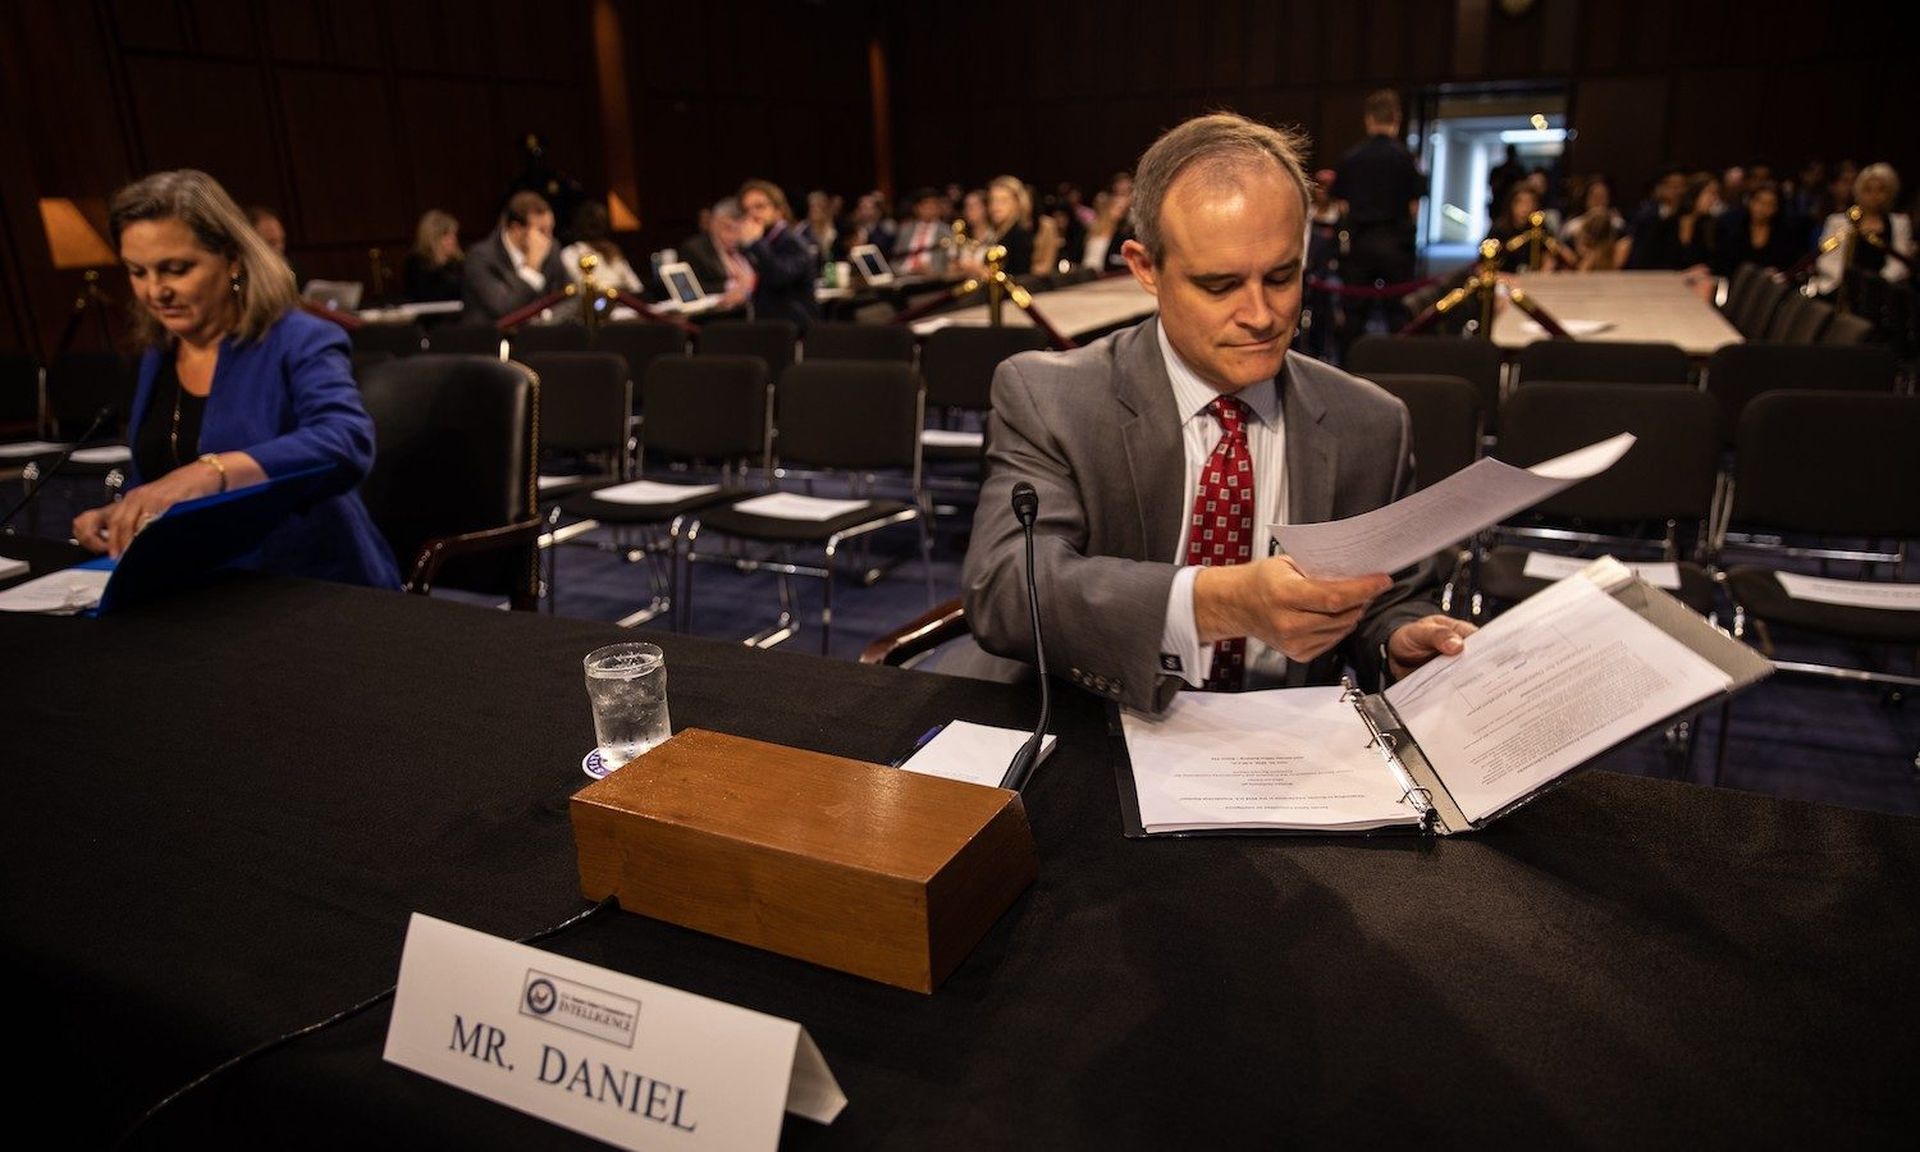 Former White House cybersecurity coordinator Michael Daniel (R) testifies during a hearing on policy response to Russian interference in the 2016 U.S. elections. Daniel is now chief executive of the Cyber Threat Alliance. (Photo by Yasin Ozturk/Anadolu Agency/Getty Images)